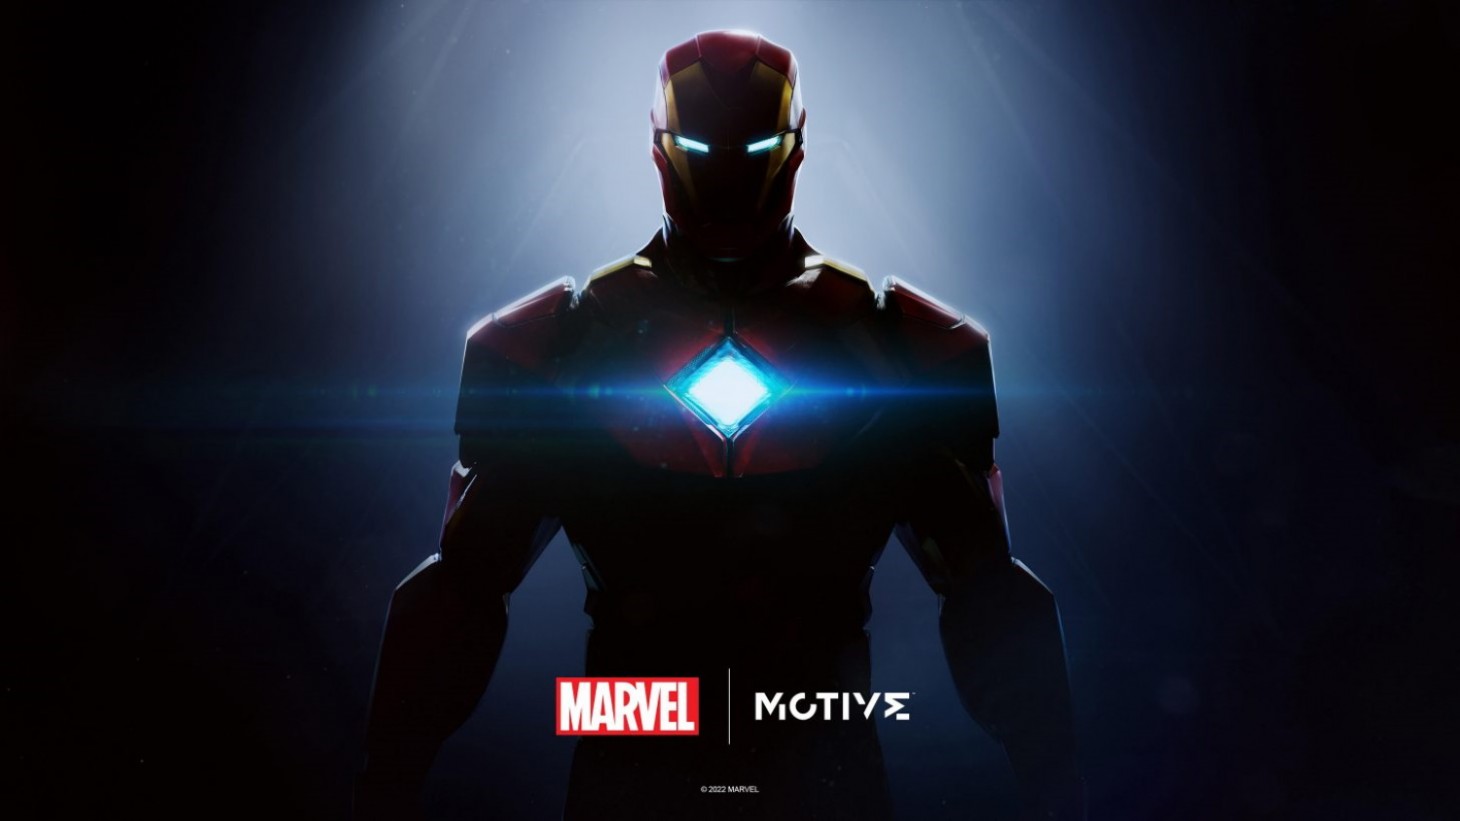 Motive Studio Announces Single-Player Iron Man Game As First Part Of EA/Marvel Collaboration - Game Informer